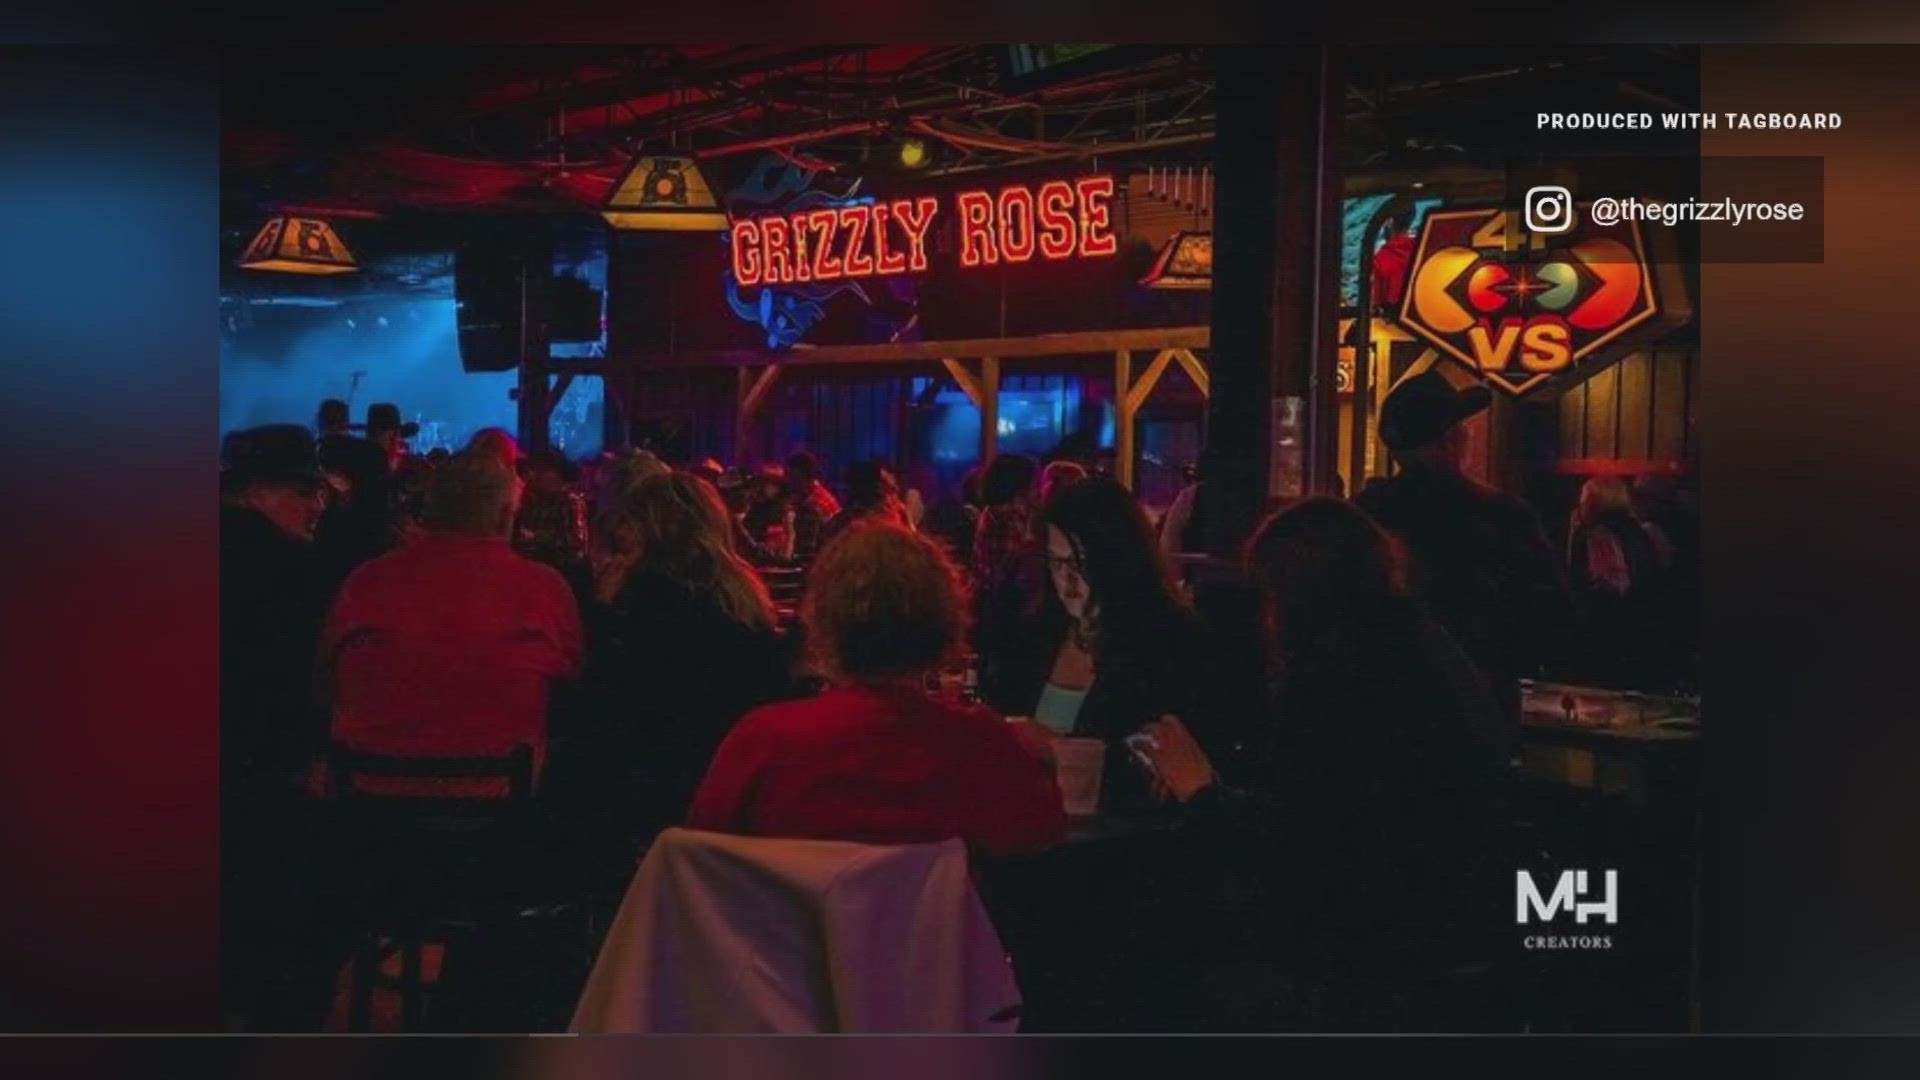 Grizzly Rose is one of five music venues around the country nominated for the award. General Manager Lindy Arnold joins us to talk about the nomination.